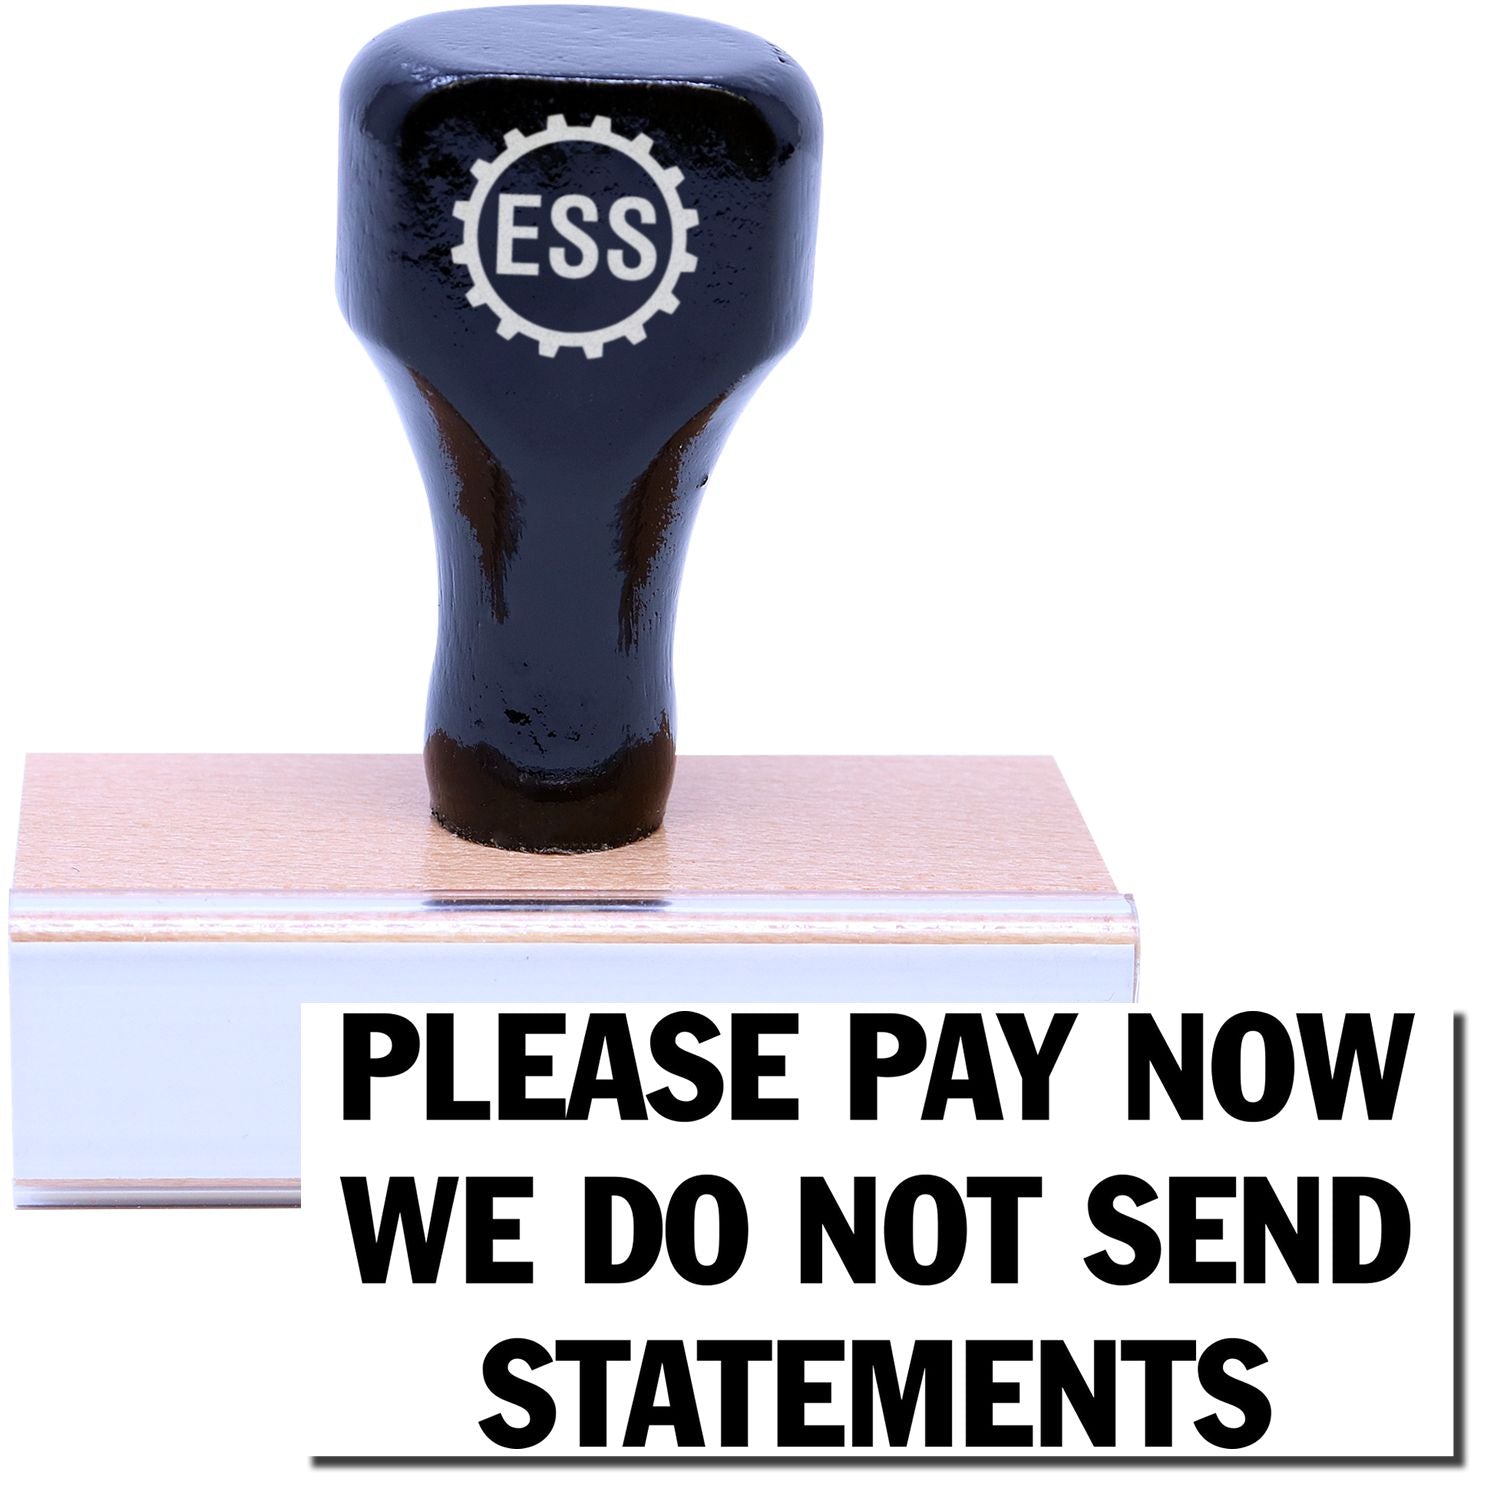 A stock office rubber stamp with a stamped image showing how the text "PLEASE PAY NOW WE DO NOT SEND STATEMENTS" in a large font is displayed after stamping.